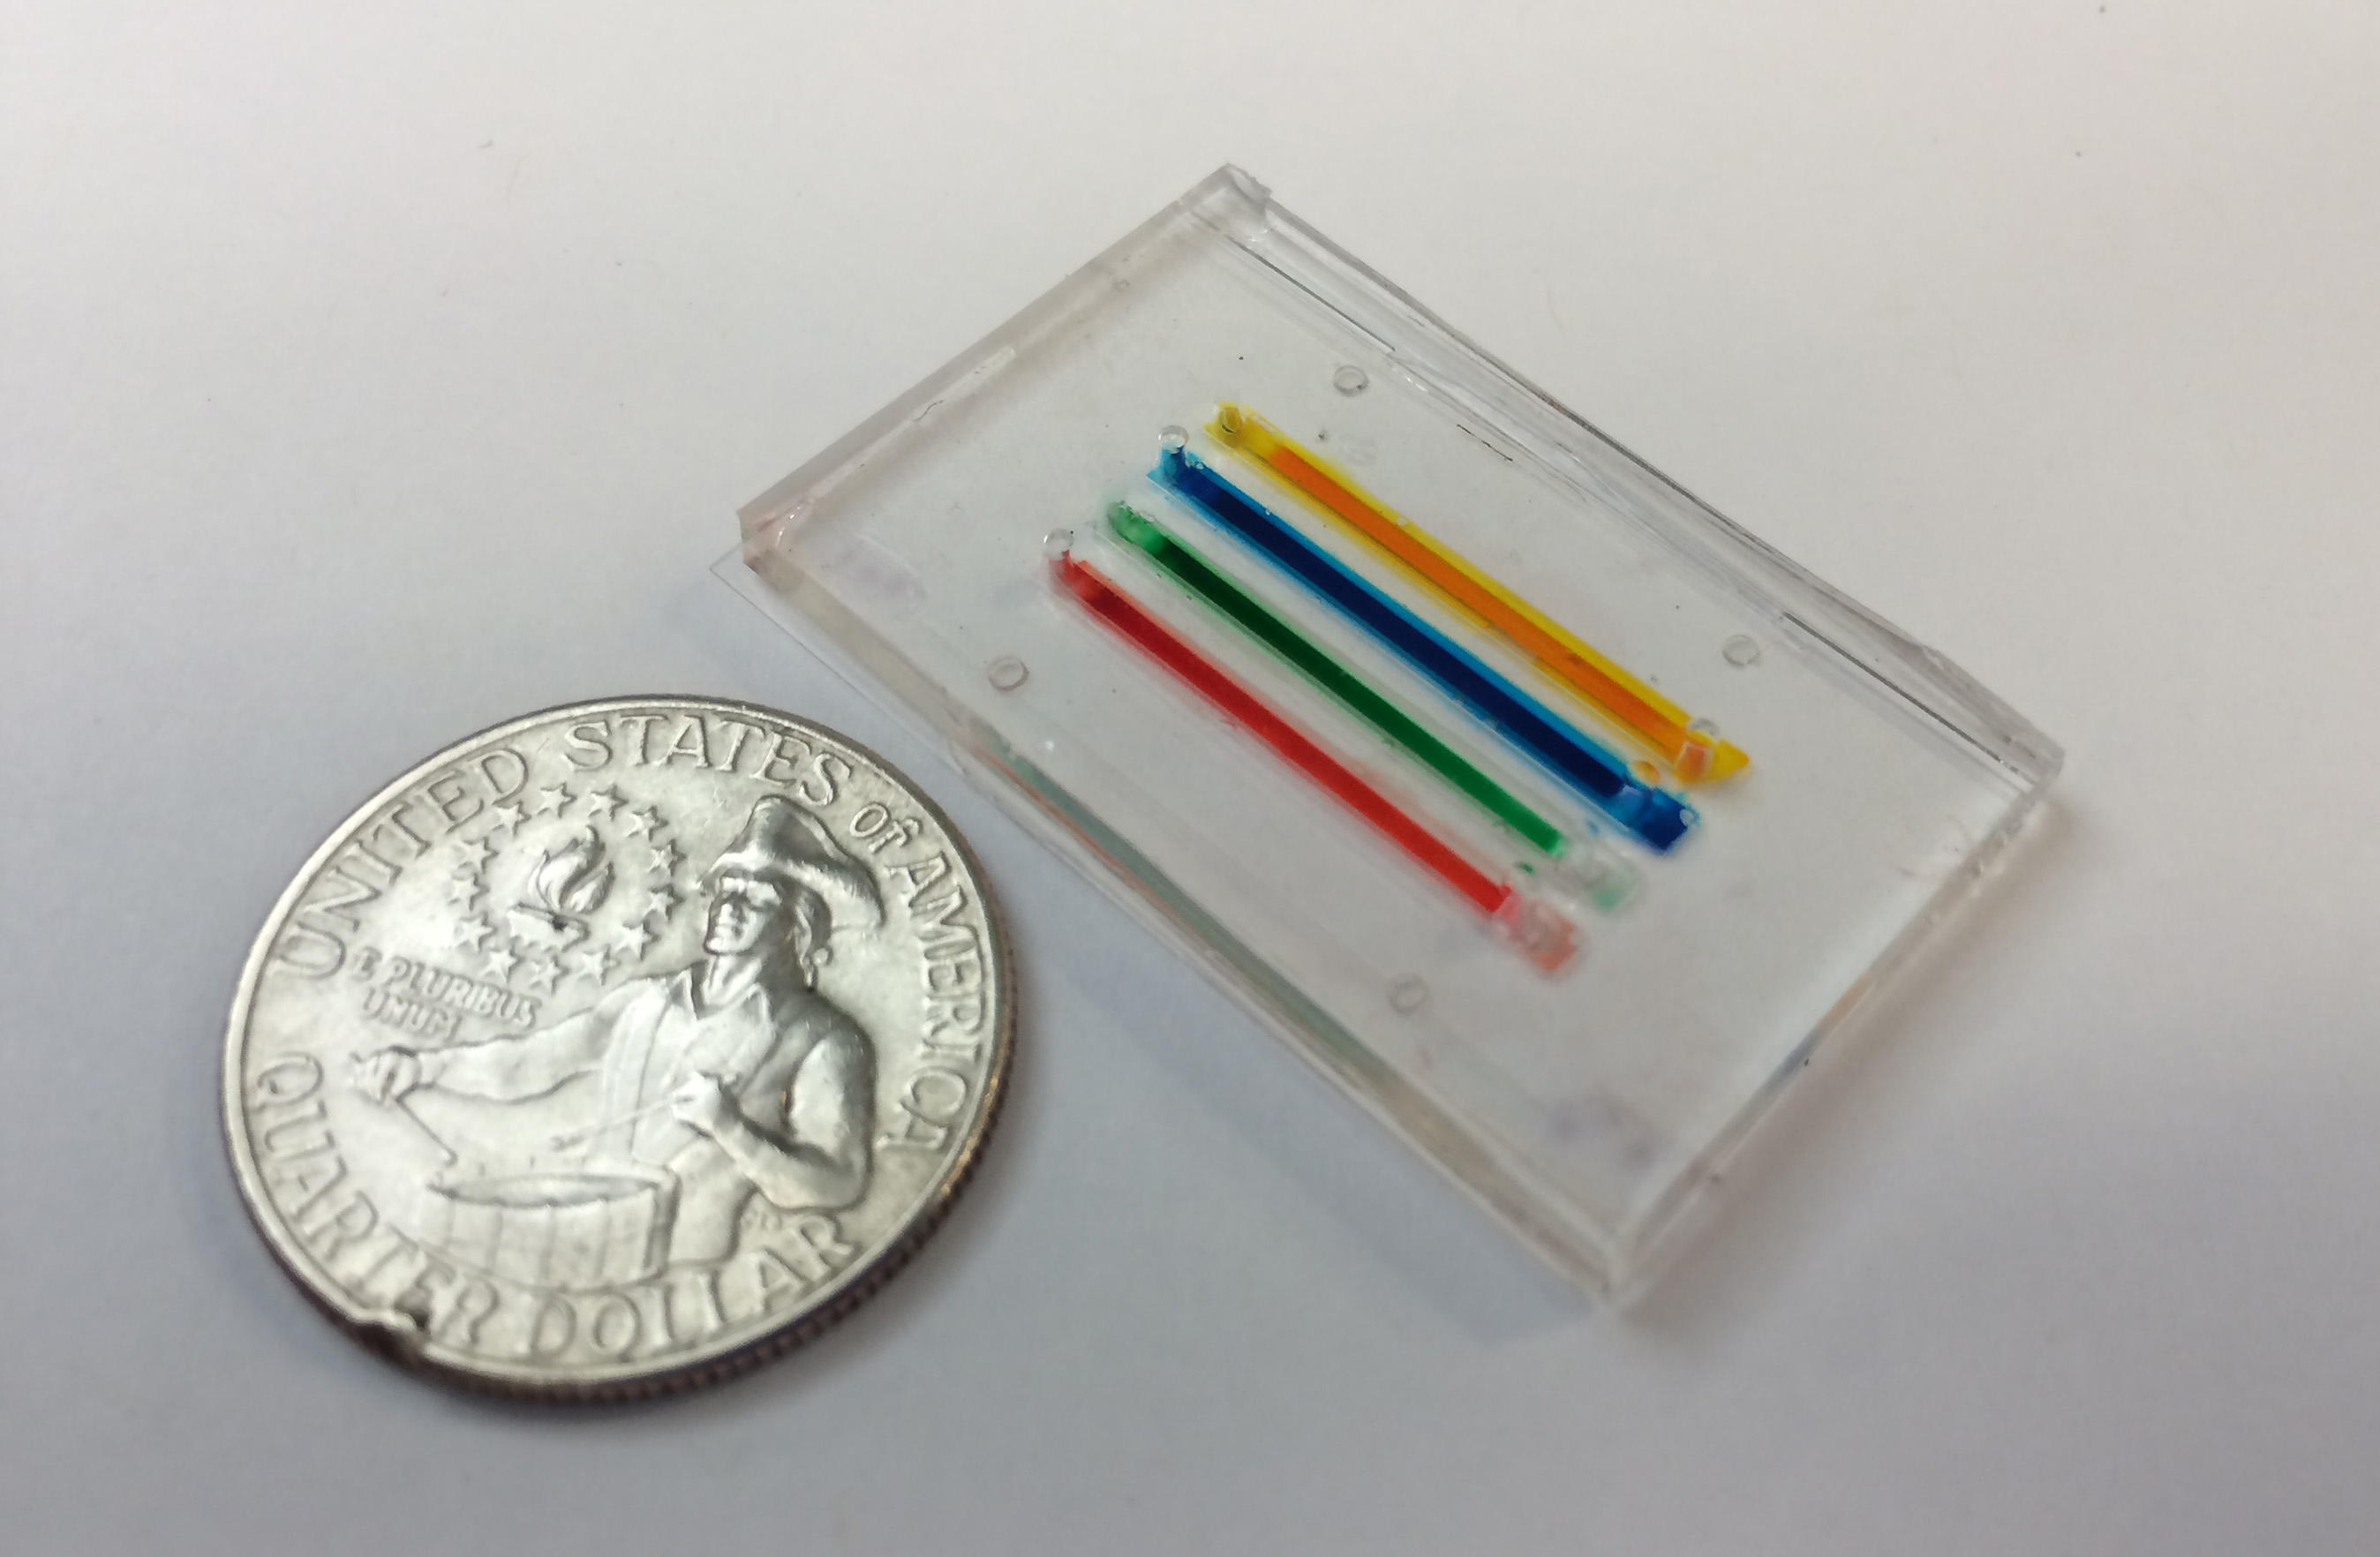 Biomedical engineers from Emory and Georgia Tech have devised a microfluidic device for the diagnosis of bleeding disorders, in which platelets can demonstrate their strength by squeezing two protein dots together using this device.

Photo credit: Emory University / Georgia Tech